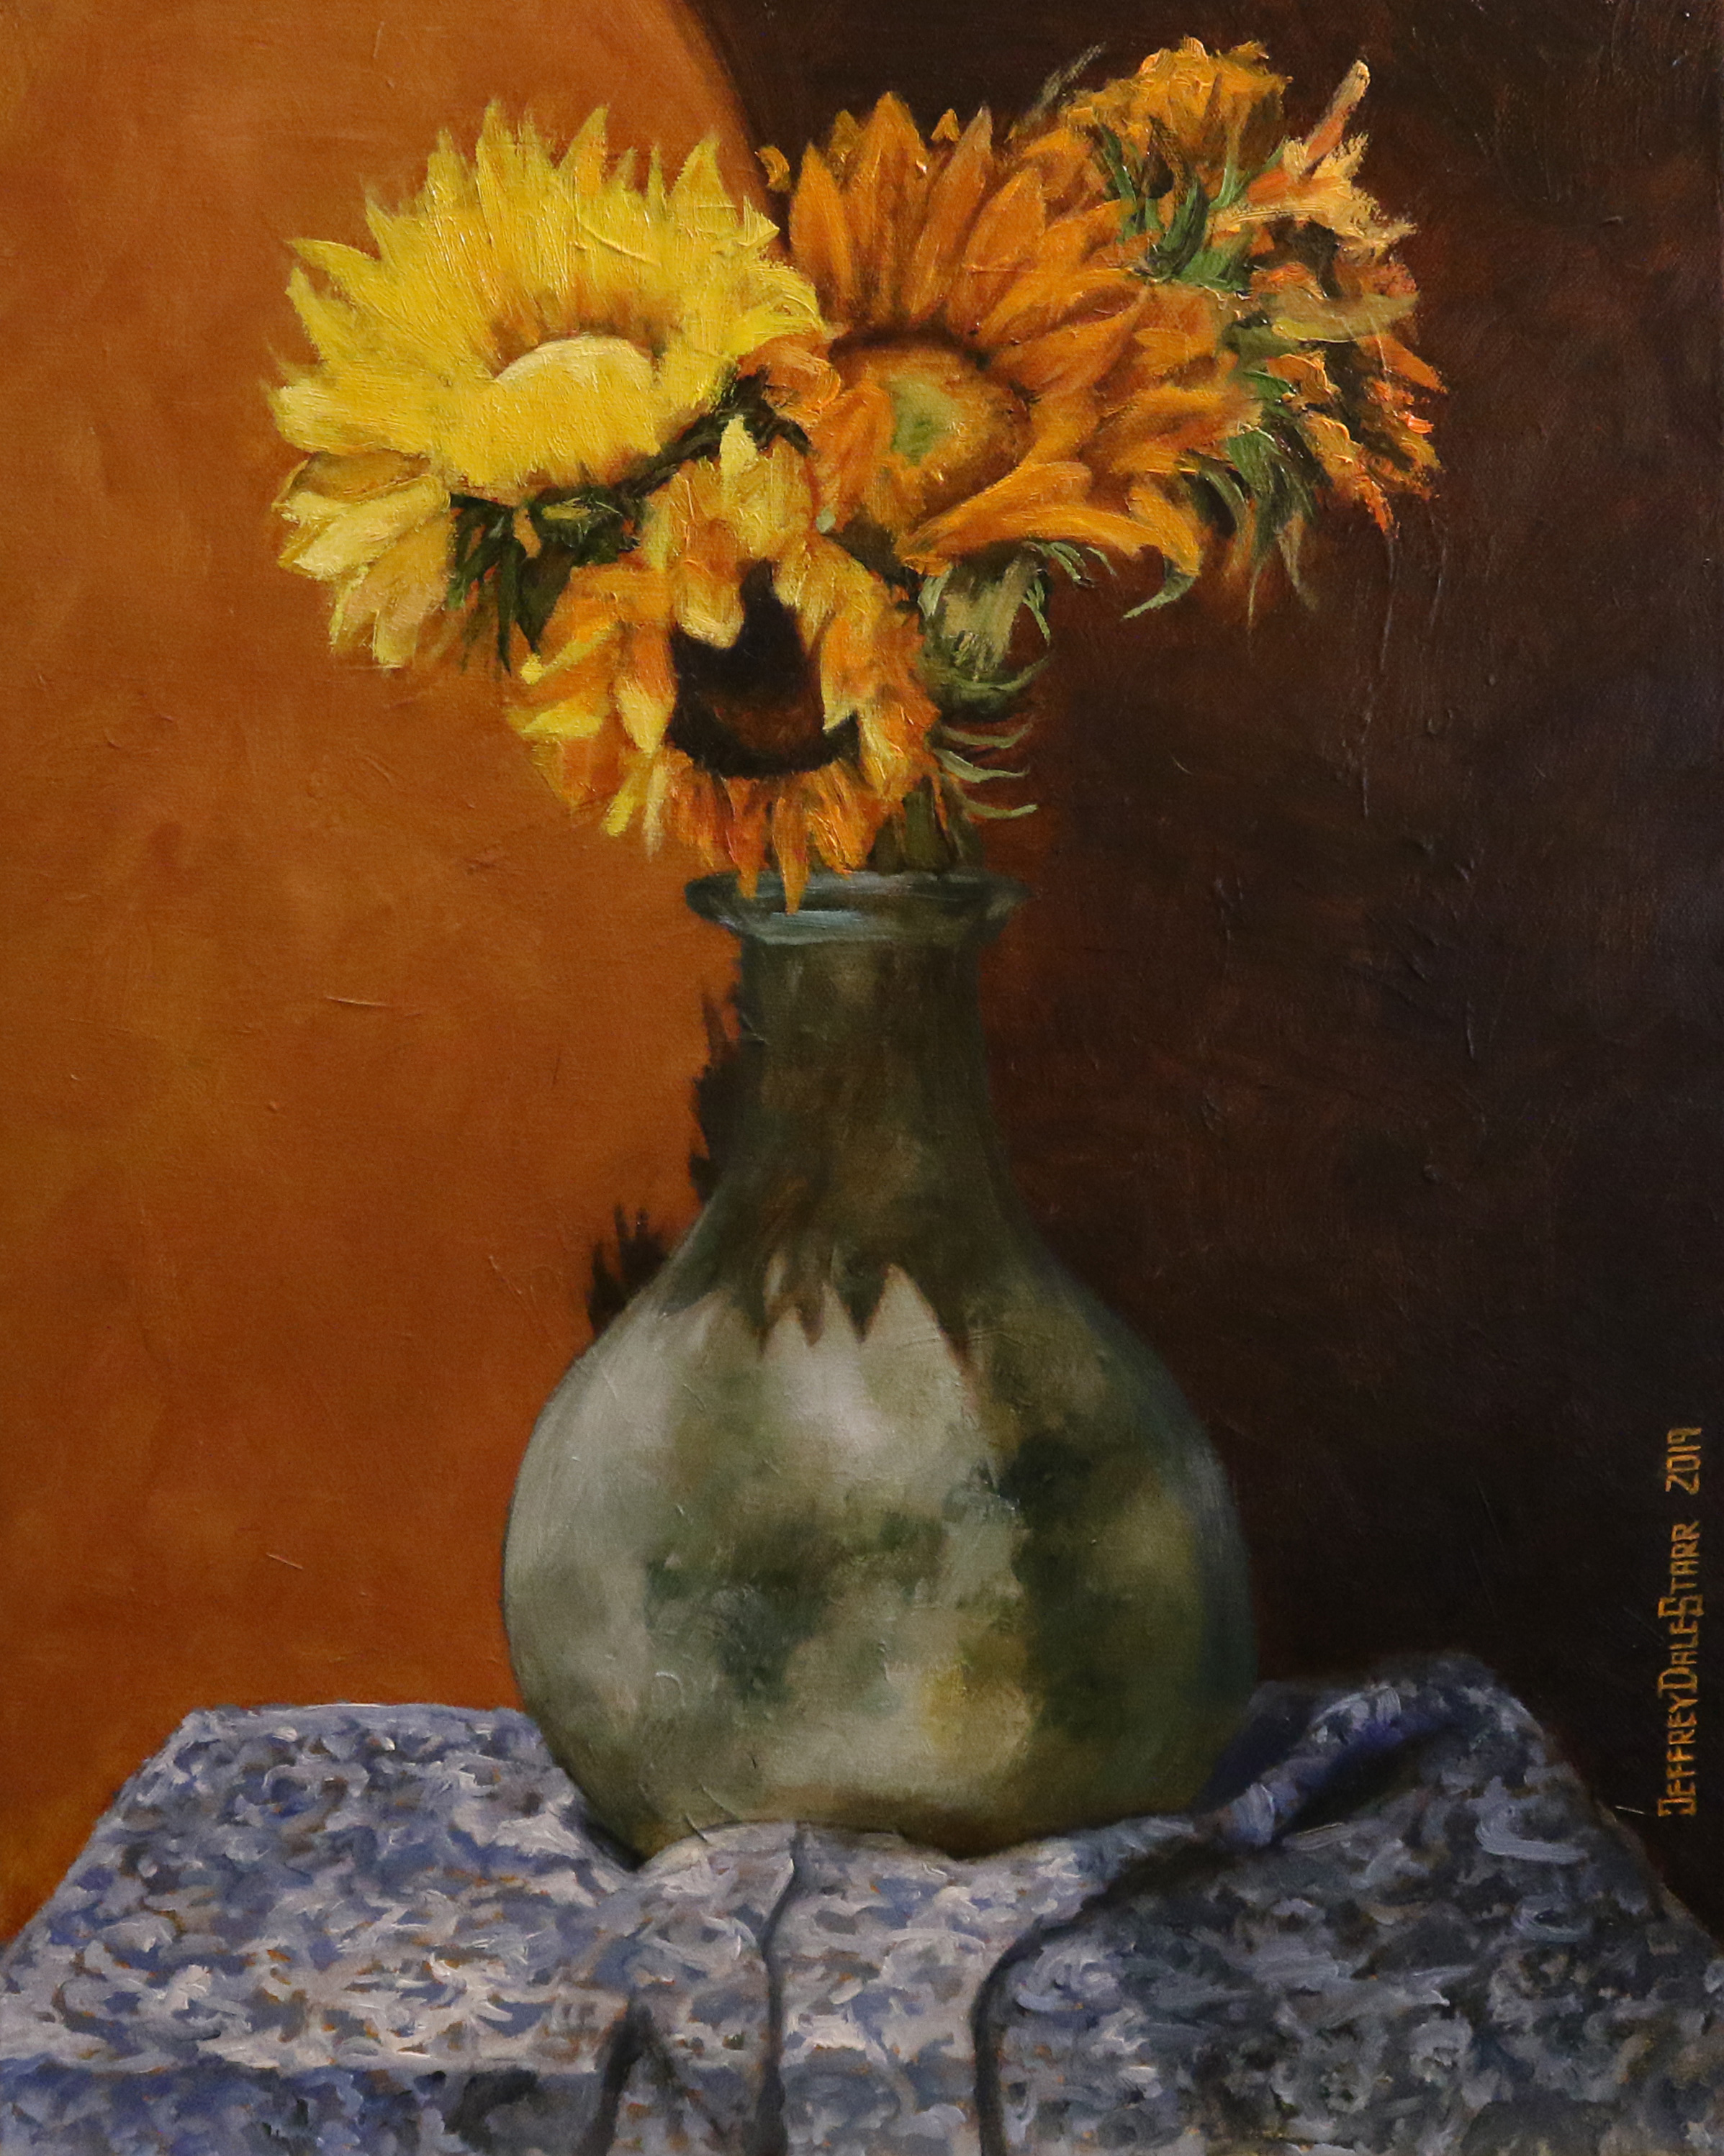 Oil painting "The Green Vase" by Jeffrey Dale Starr